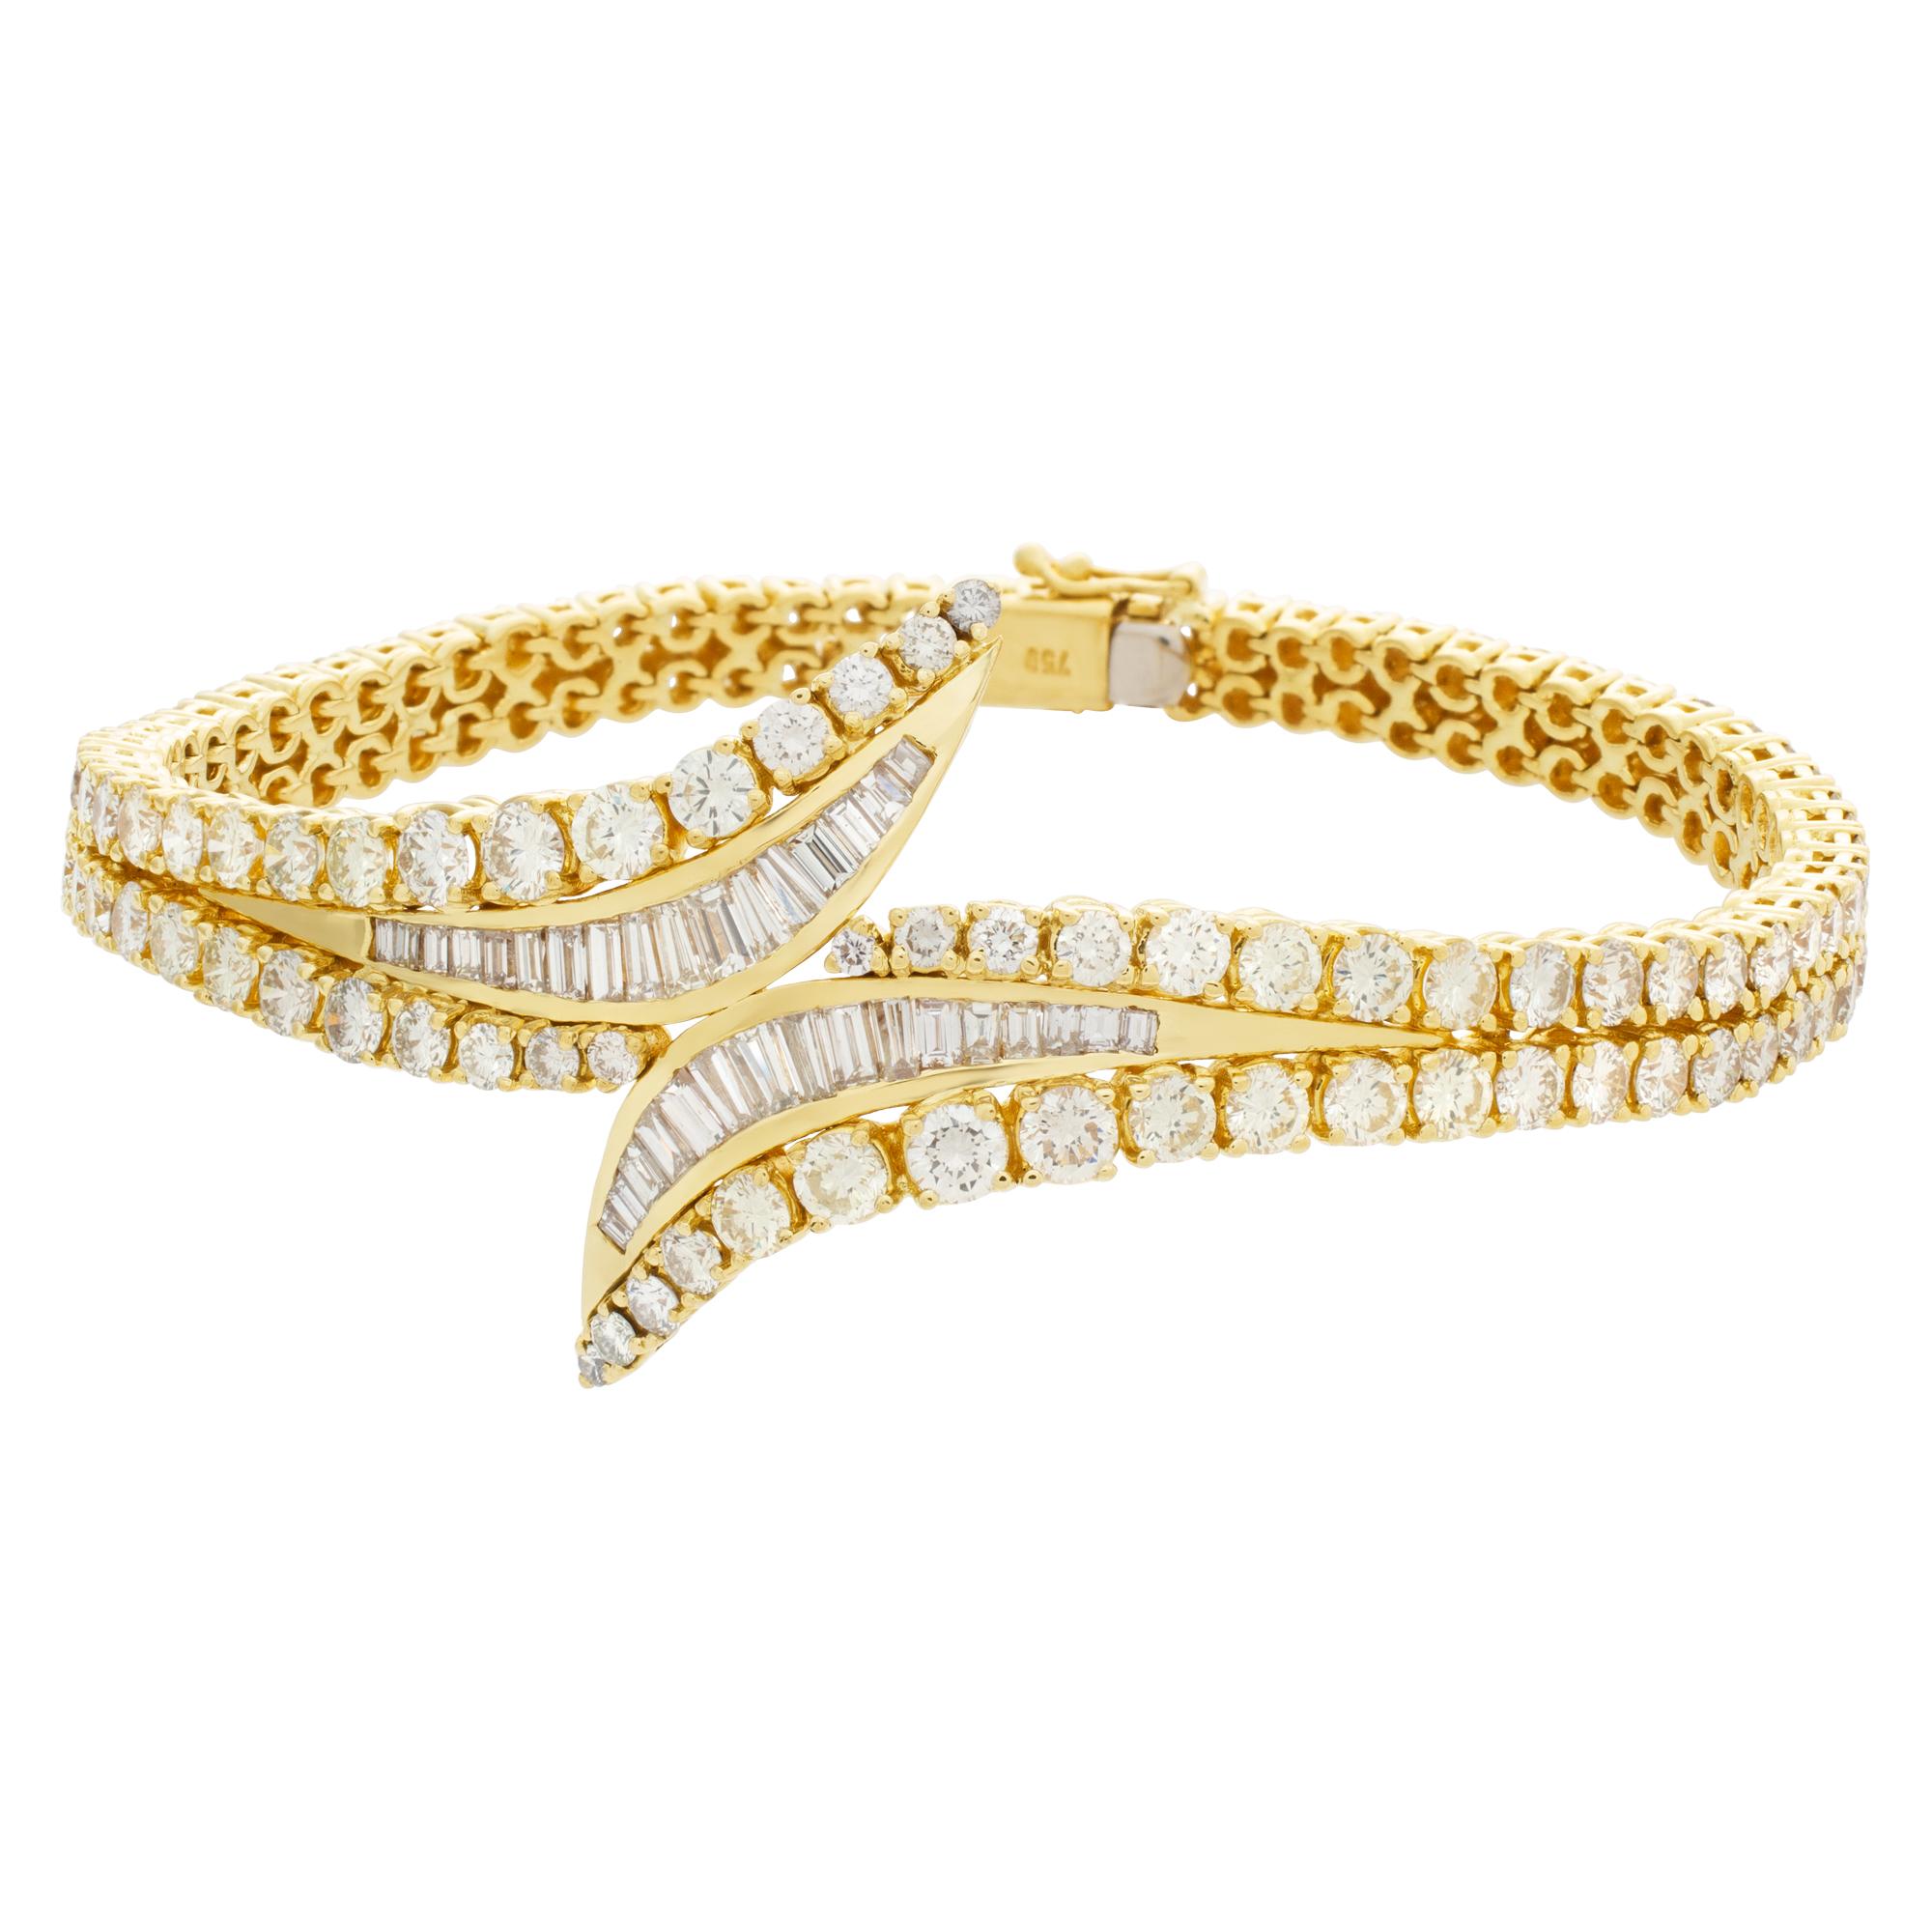 Bracelet in 18k Yellow Gold with over 9 Carats in Round Brilliant Cut Diamonds For Sale 2